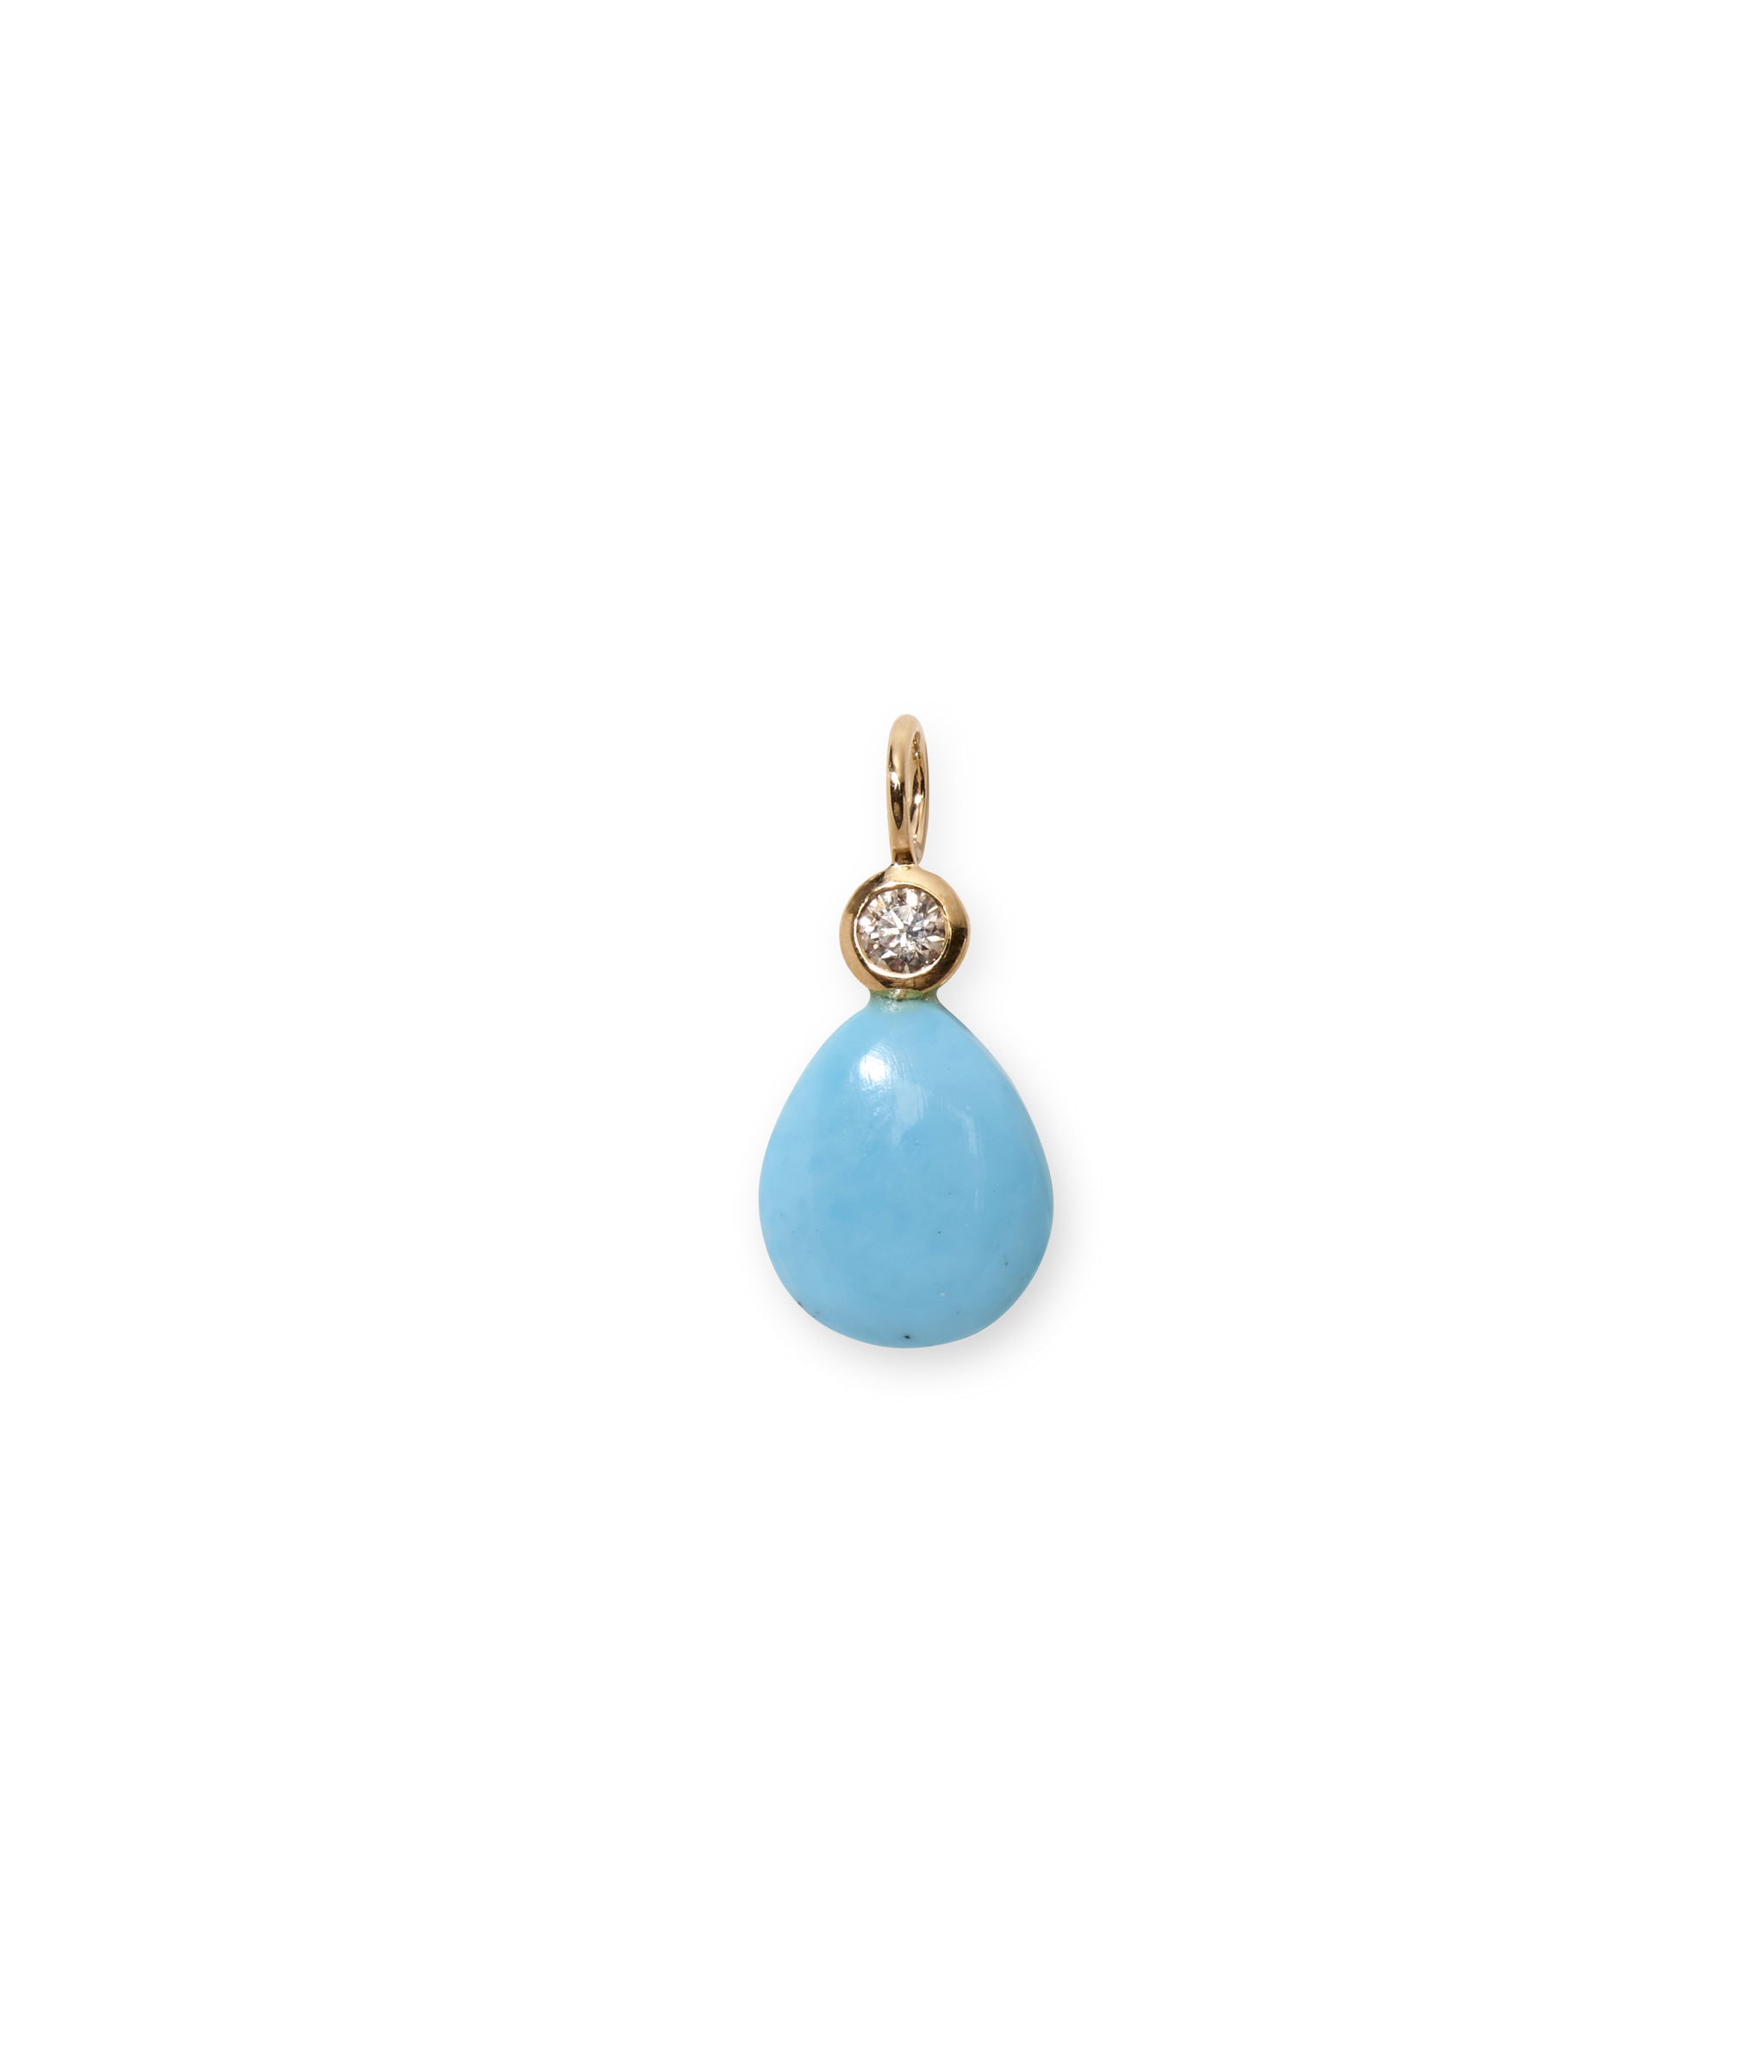 Diamond & Turquoise 14k Gold Necklace Charm. Small diamond top and turquoise drop with 14k gold bezel and ring